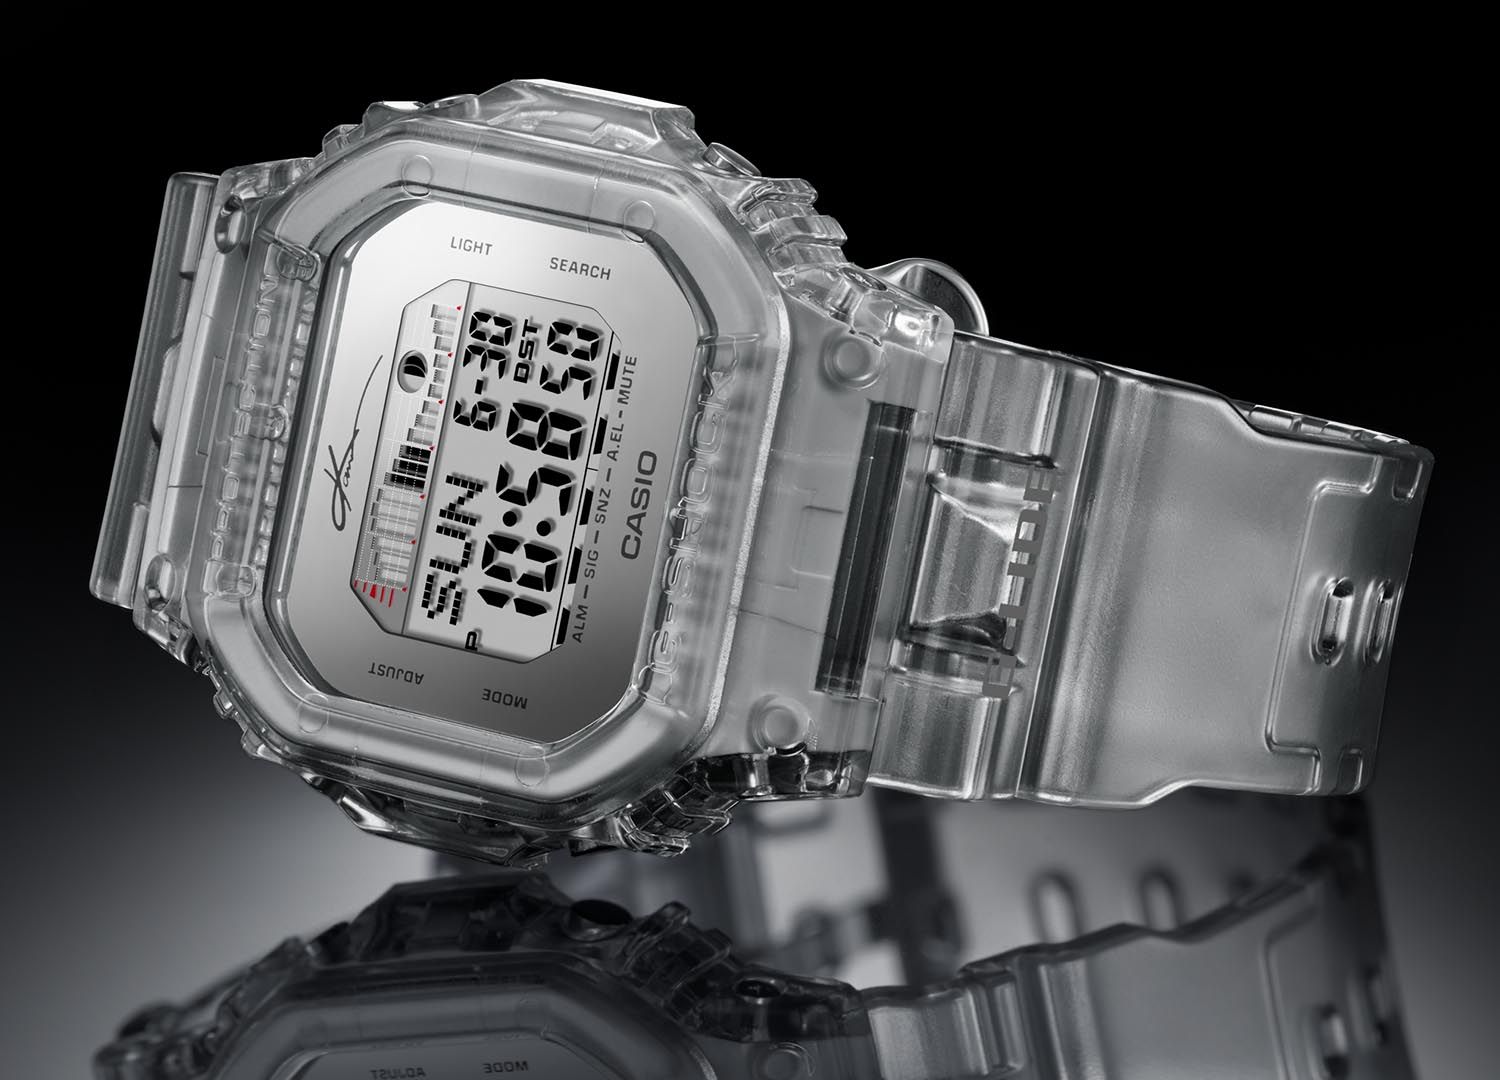 Casio G Shock Announces Latest G Lide Model In Collaboration With Pro Surfer Kanoa Igarashi